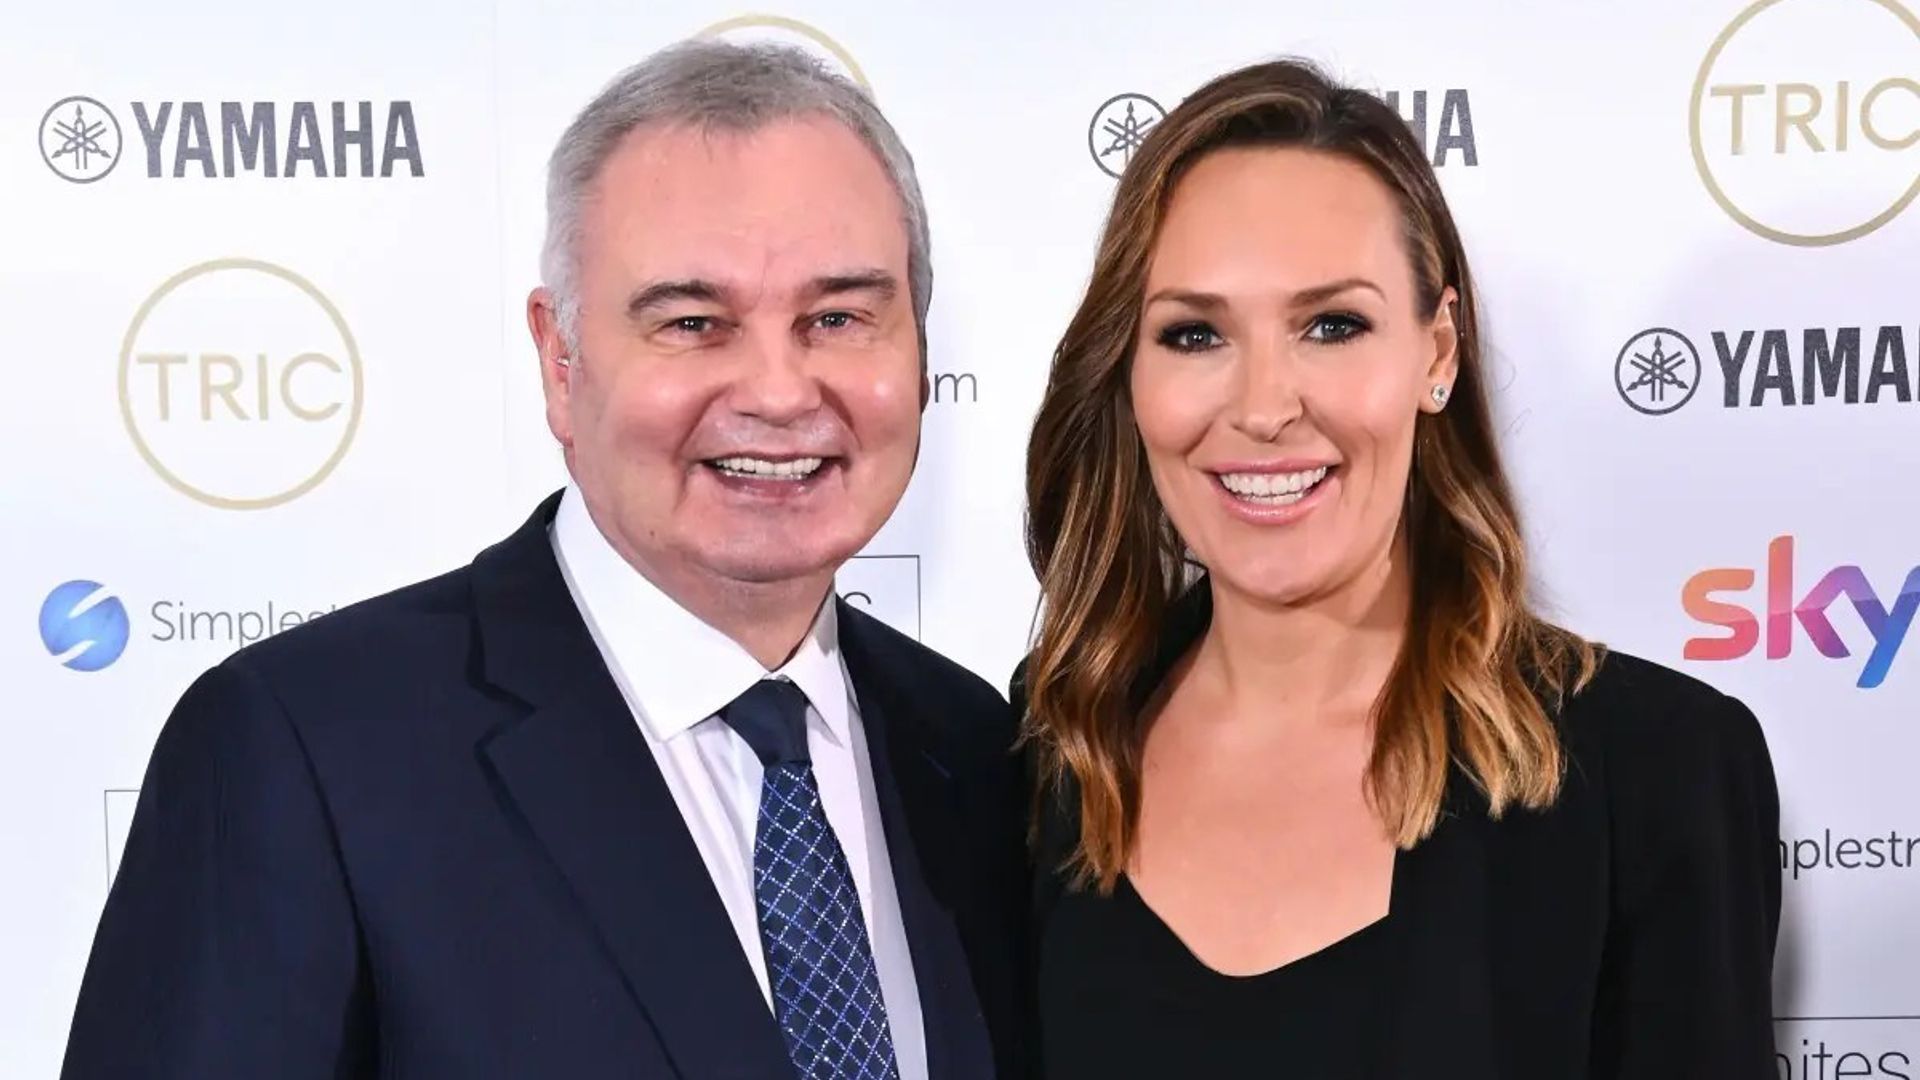 GB News' Isabel Webster reveals close relationship with Eamonn Holmes